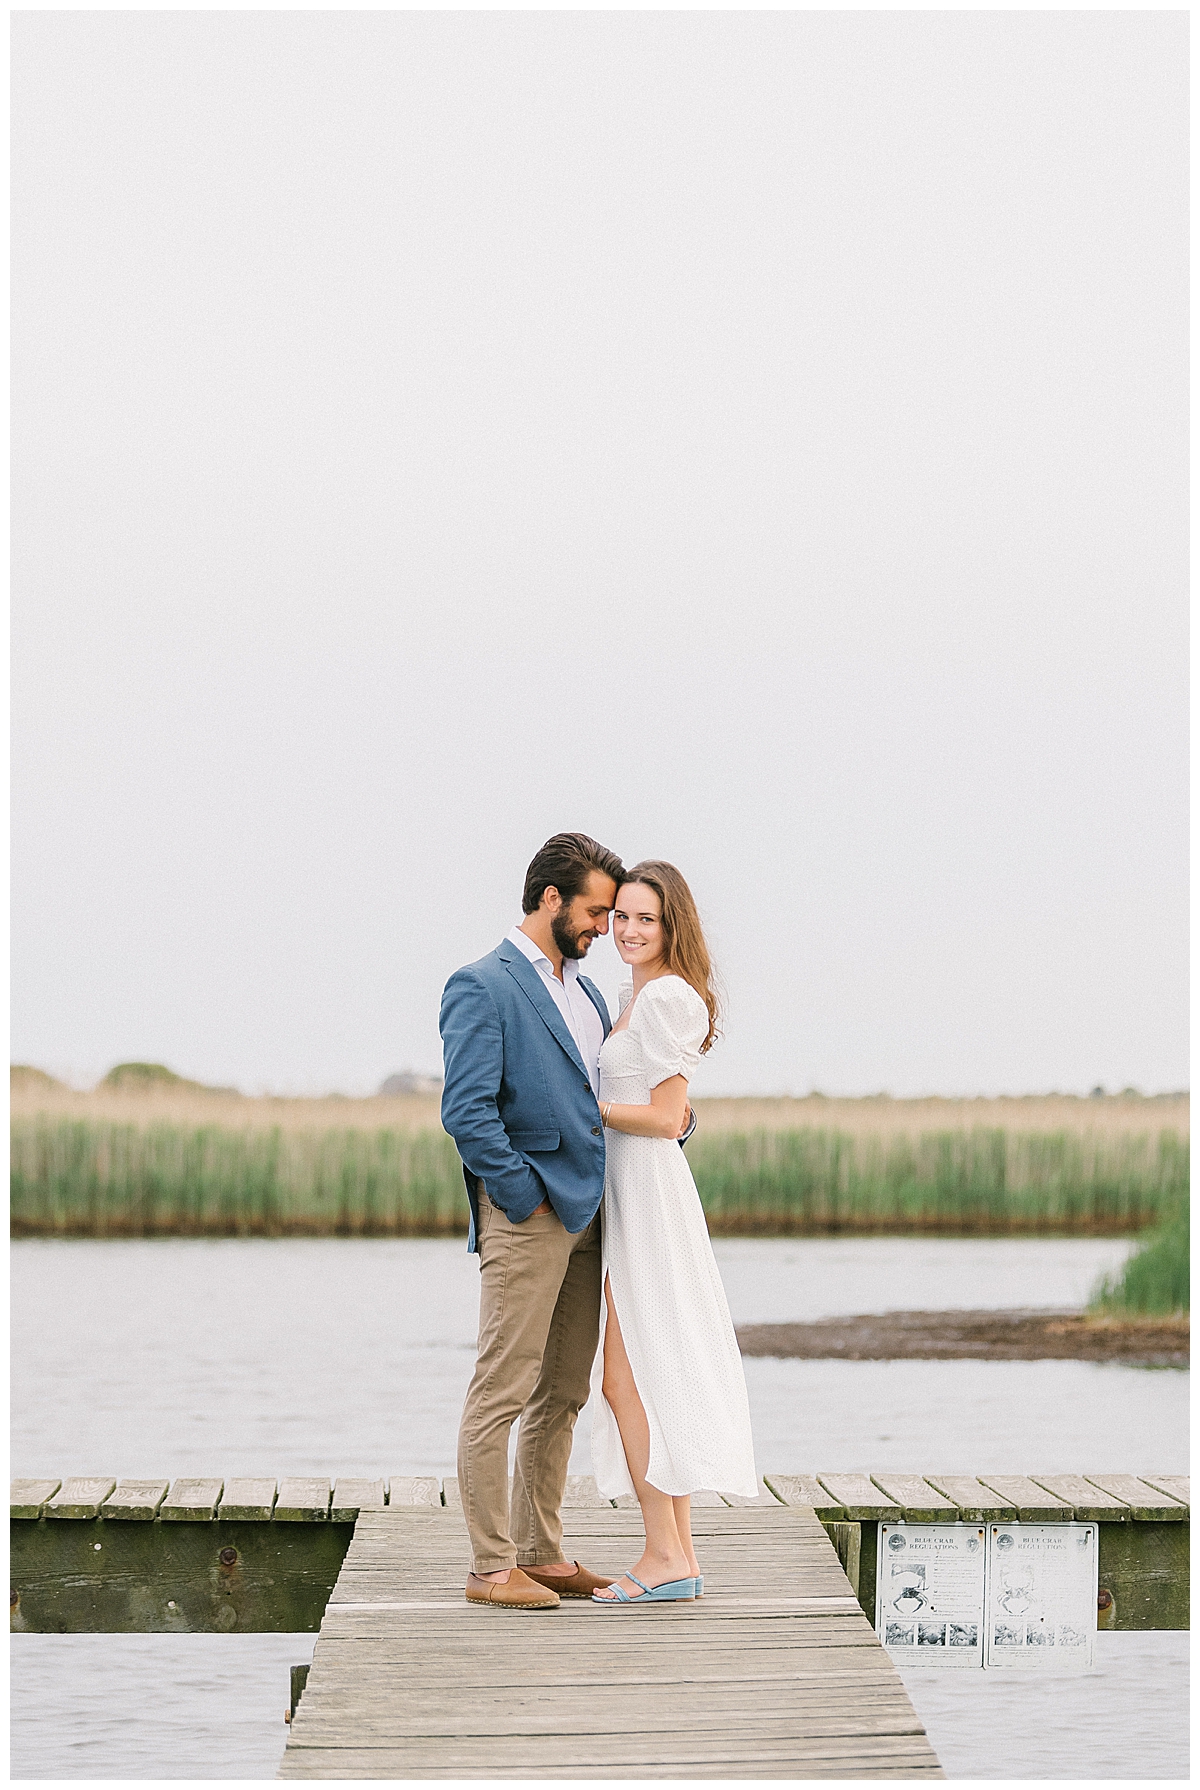 Jane and Richard's Nantucket Engagement Session on the dock